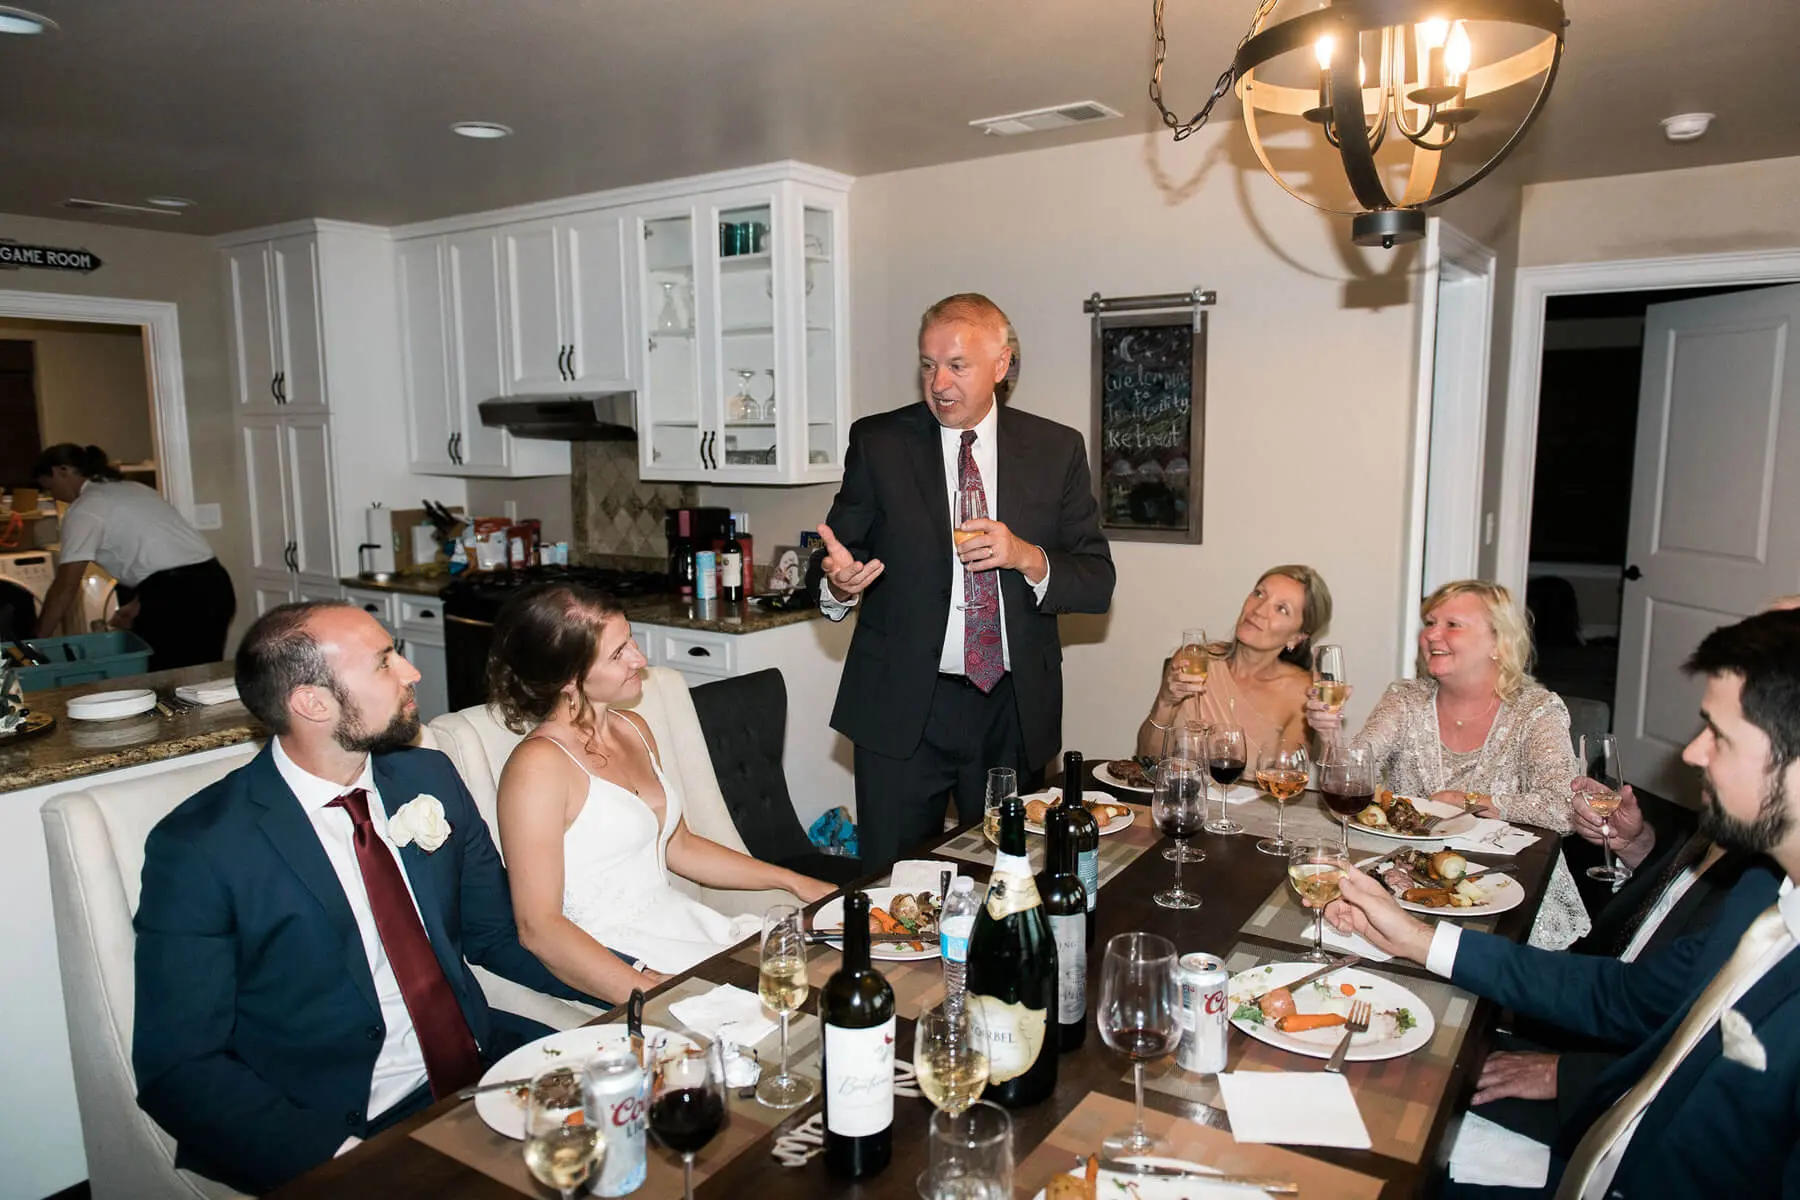 father of bride shares toast during intimate wedding reception at private residence in oakhurst california